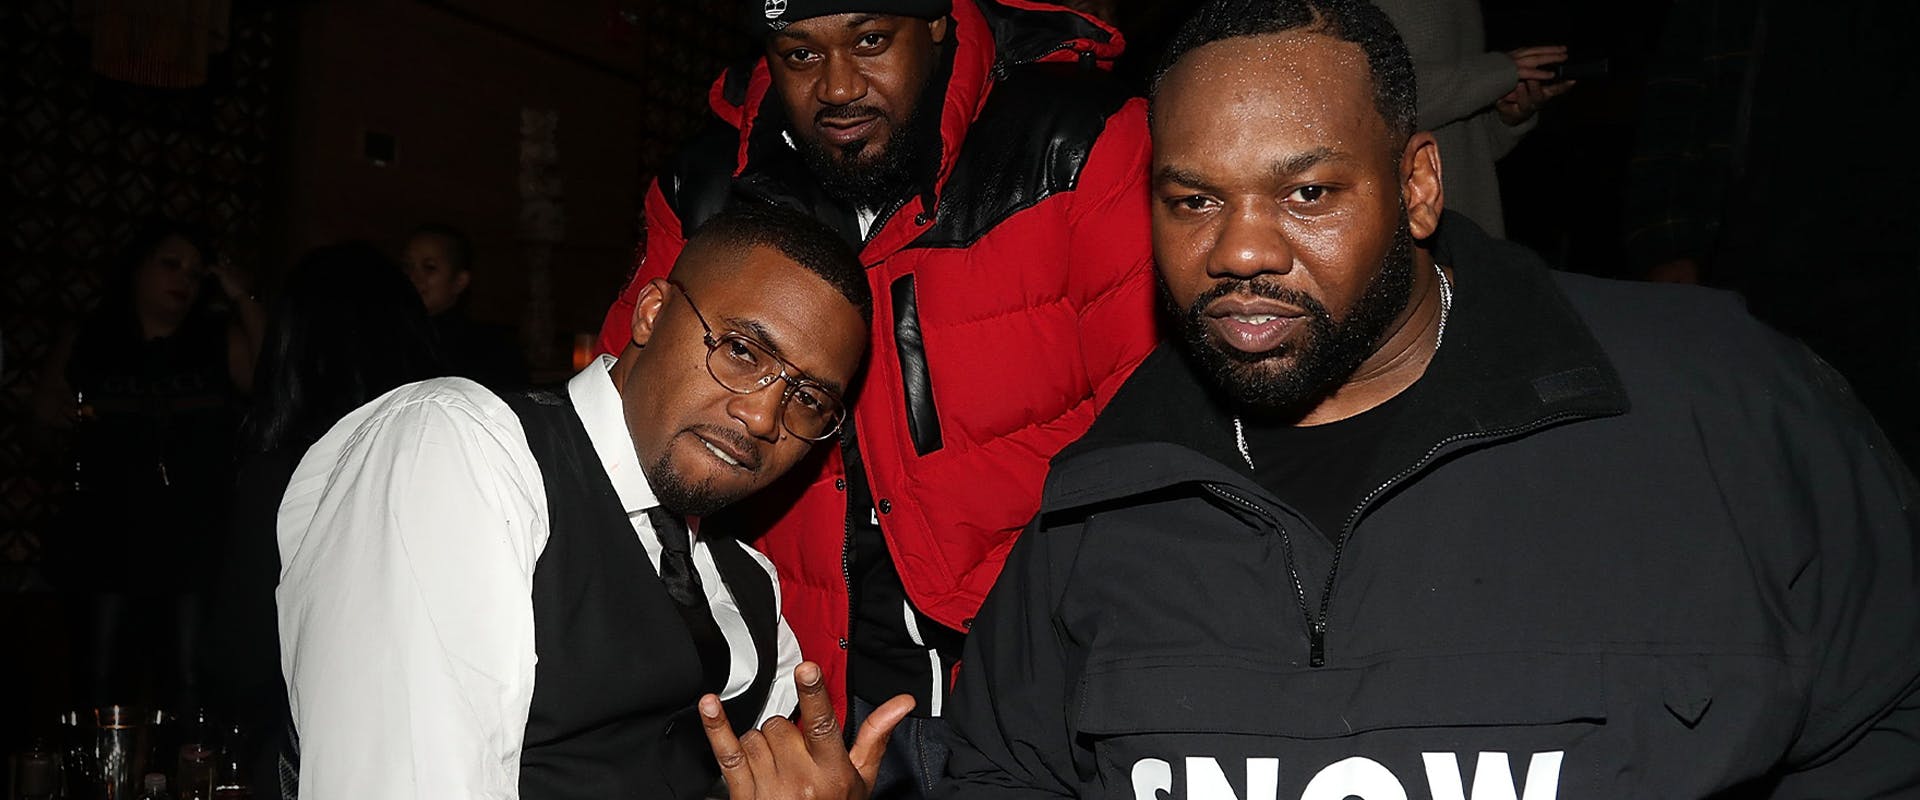 Nas, Raekwon and Ghostface Killah attend Alicia Keys Birthday Celebration at TAO on January 25, 2018 in New York City. (Photo by Shareif Ziyadat/Getty Images)